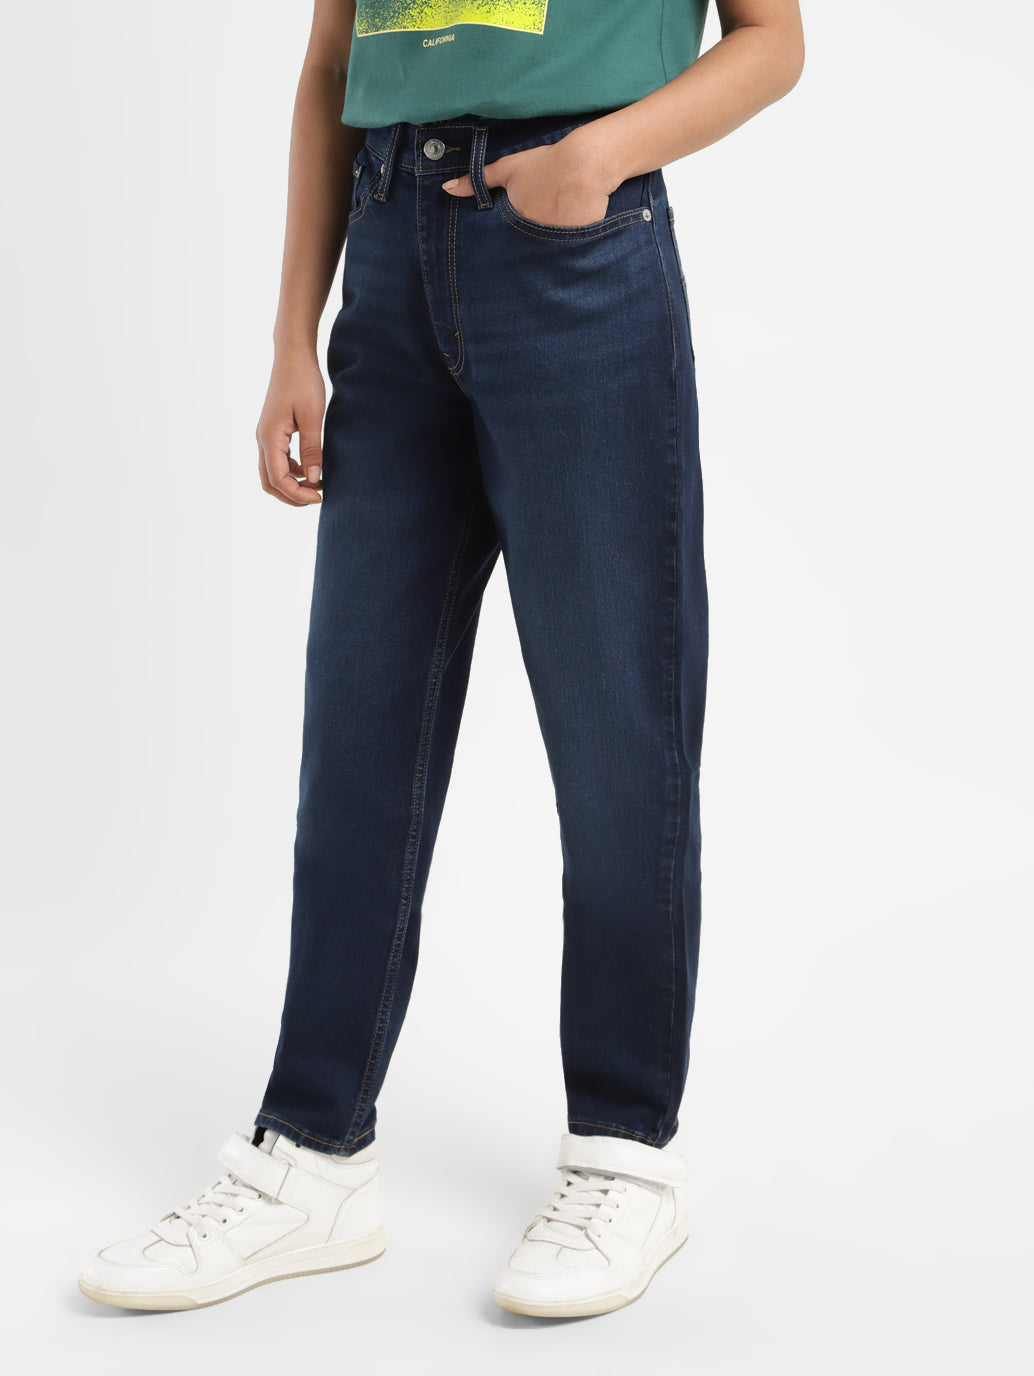 High-waisted Taper Fit Women's Jeans - Dark Wash